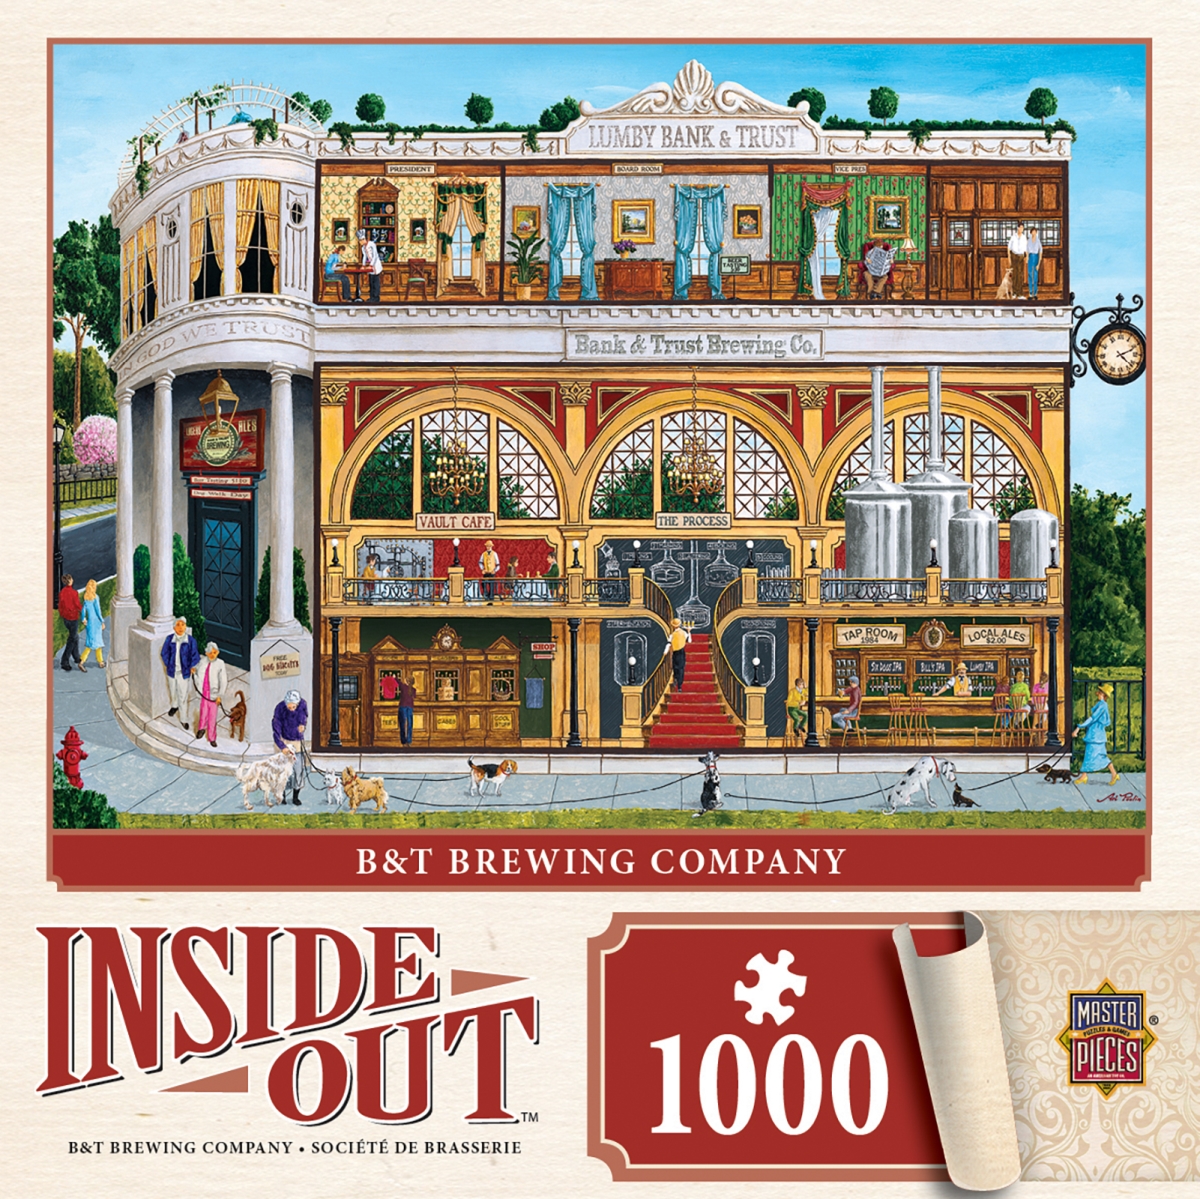 71835 19.25 X 26.75 In. Art Poulin Inside Out B&t Brewing Company Jigsaw Puzzle - 1000 Piece